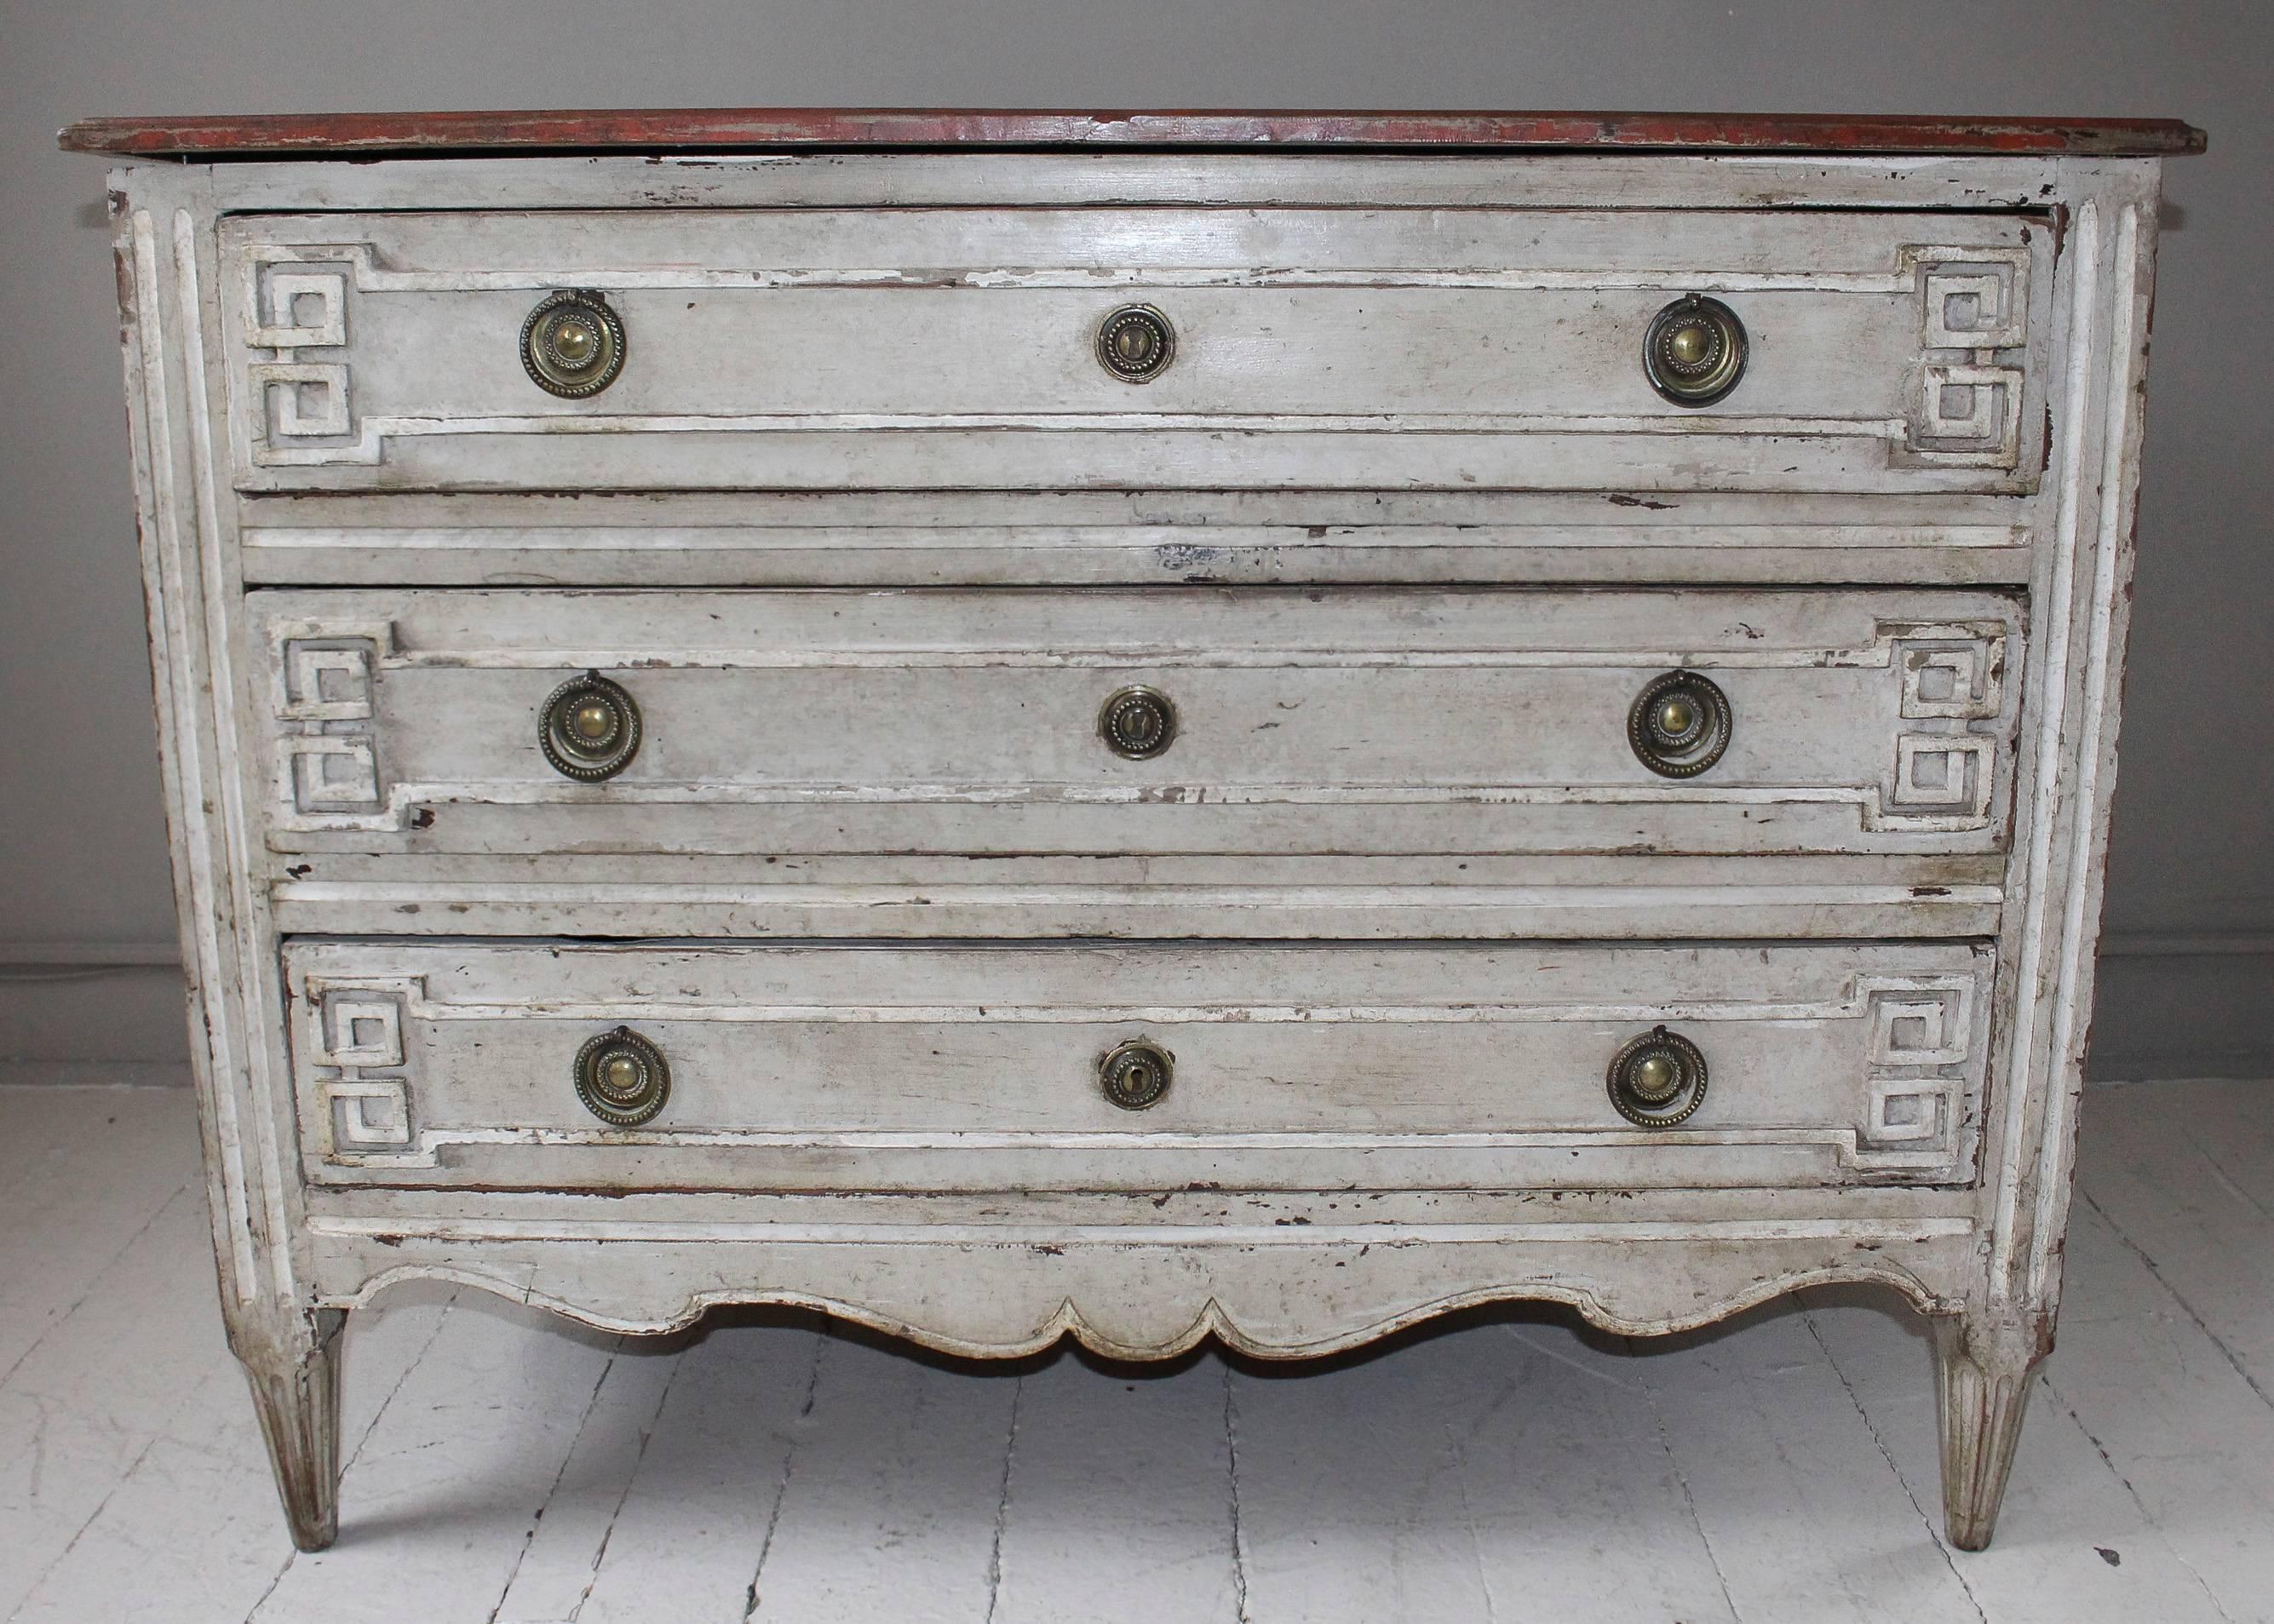 Painted commode, 19th century France, with three drawers having carved Greek key decoration. Commode is in distressed oyster paint with red mottled painted top. Brass fittings and carved scallop apron lends further charm.